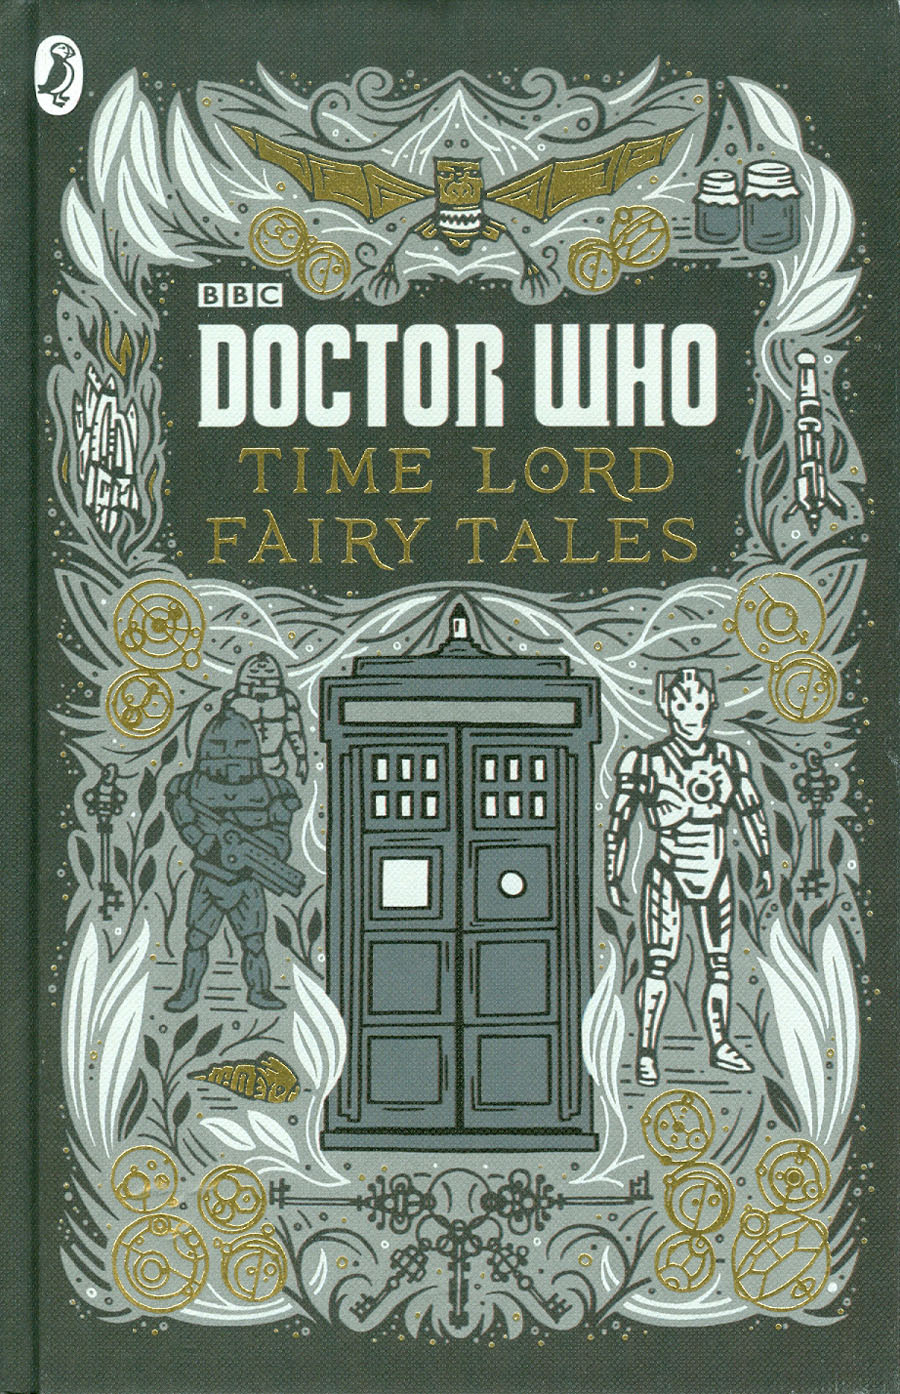 Doctor Who Time Lord Fairytales HC